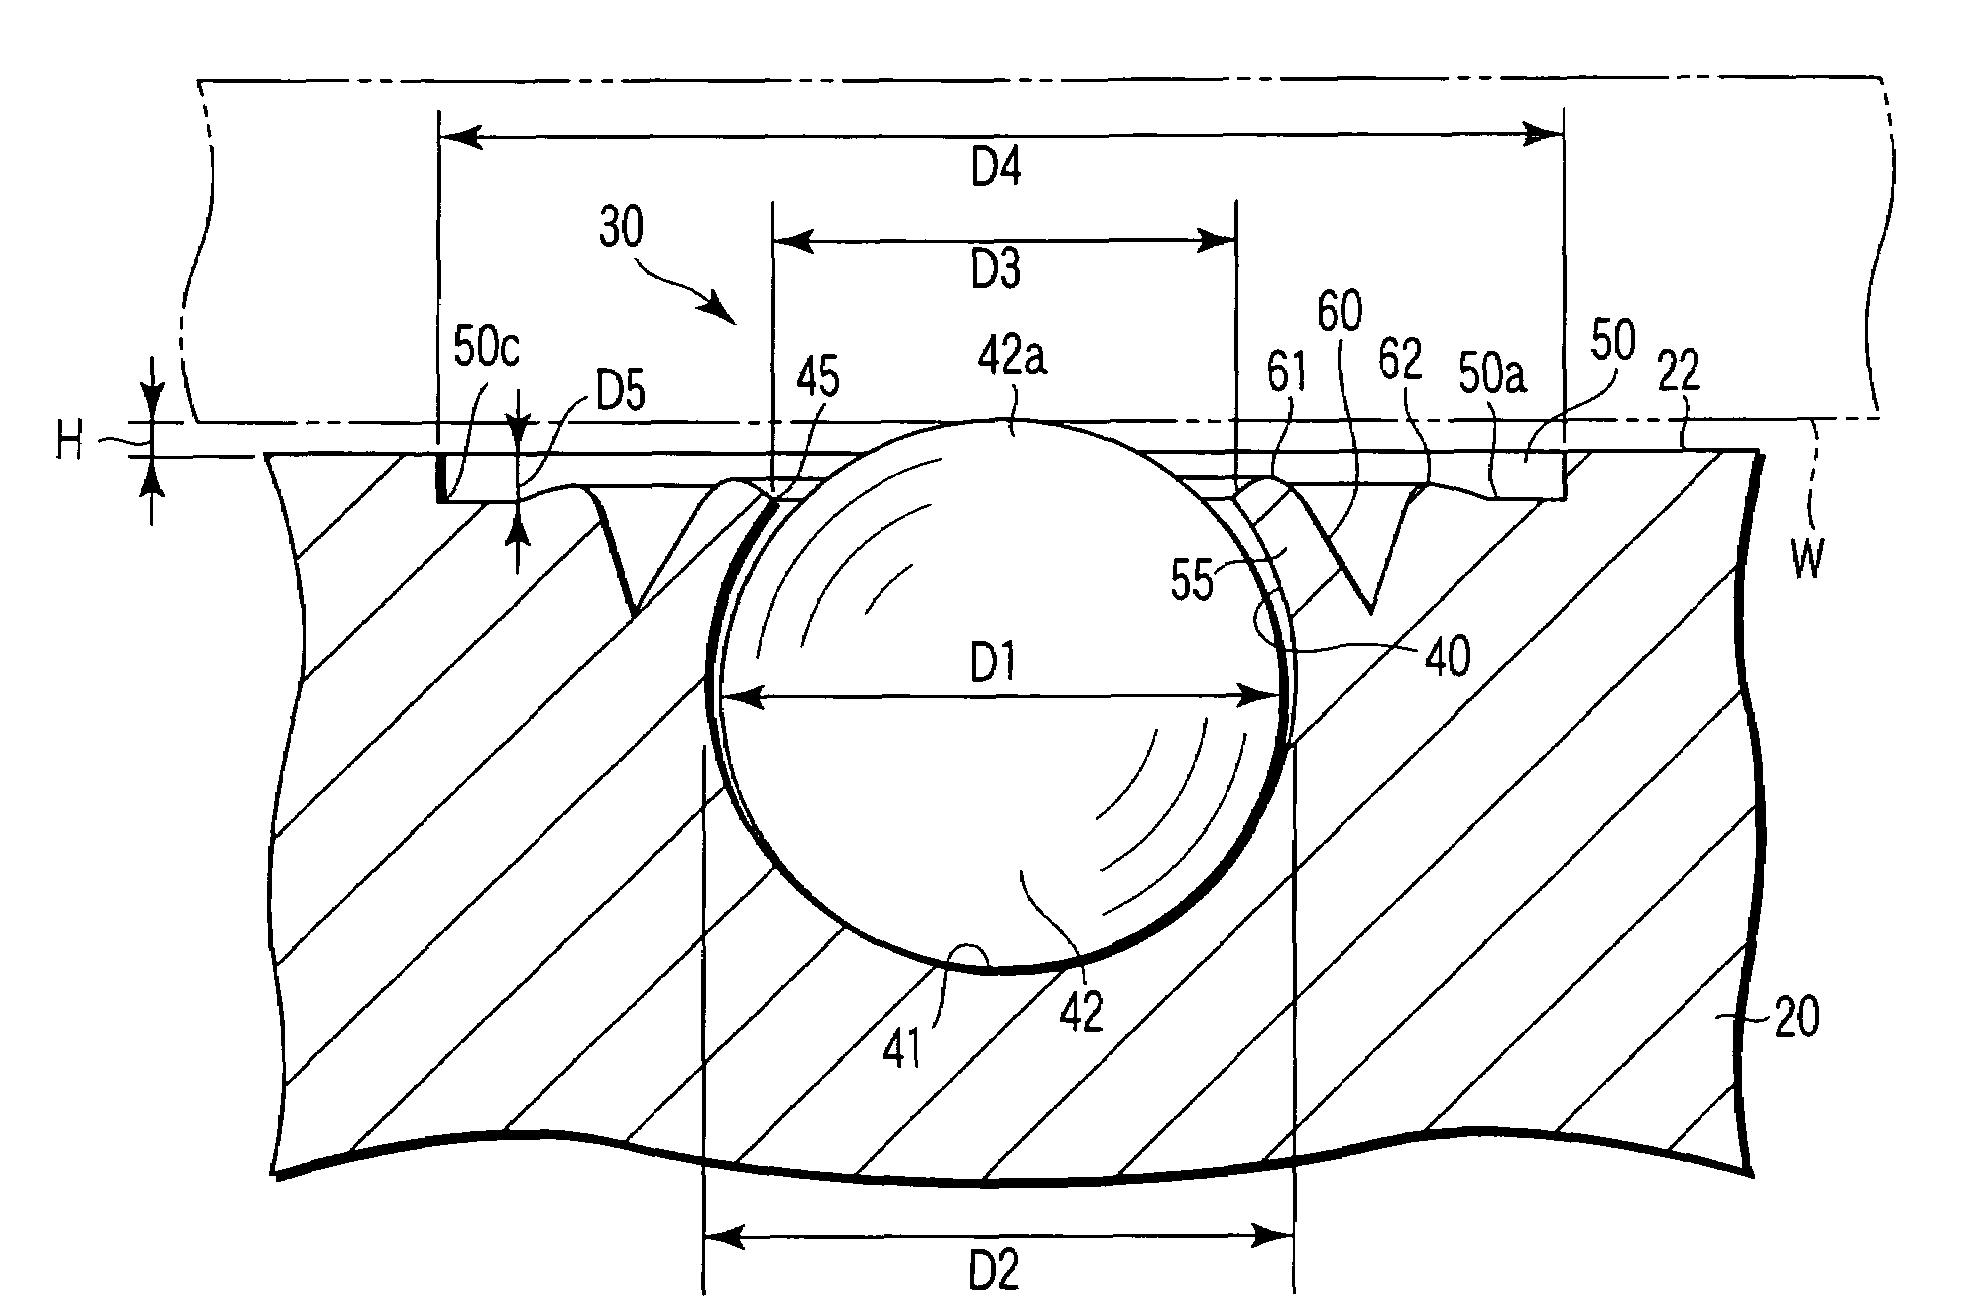 Substrate supporting apparatus